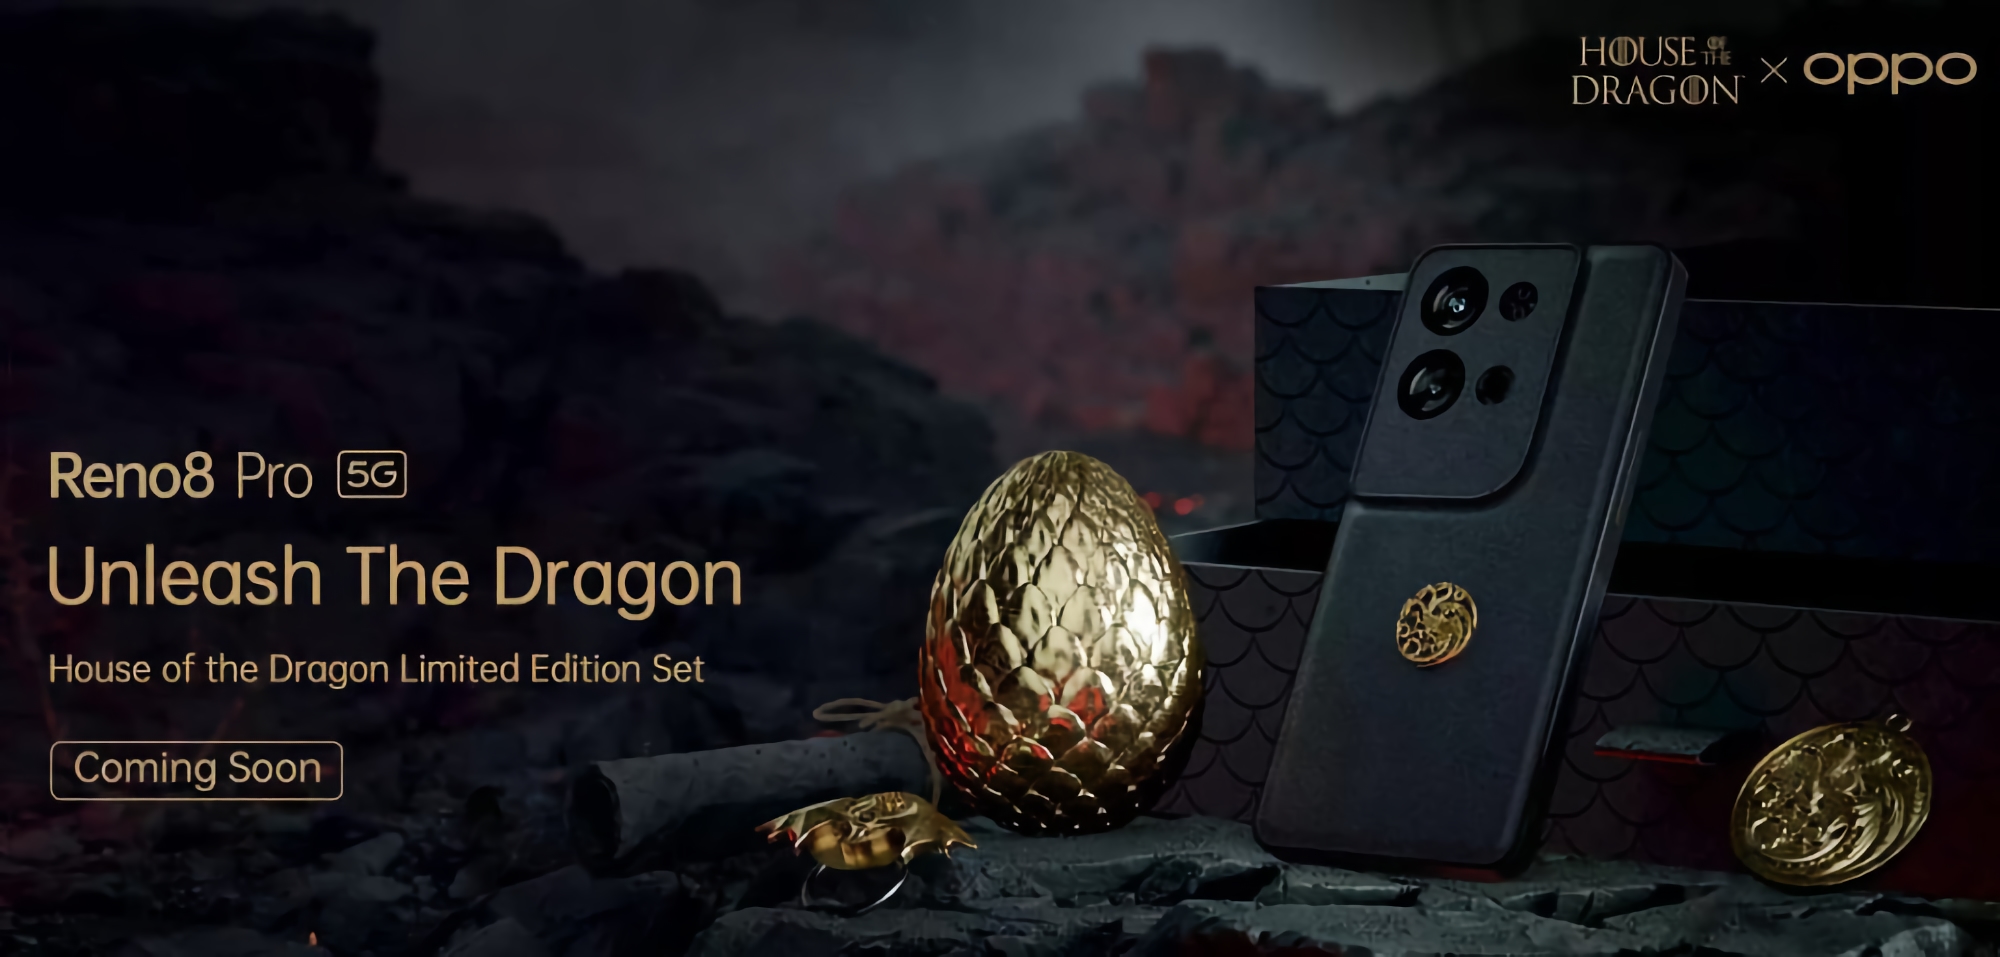 For fans of the series House of the Dragon: OPPO will release a special limited edition smartphone Reno 8 Pro 5G